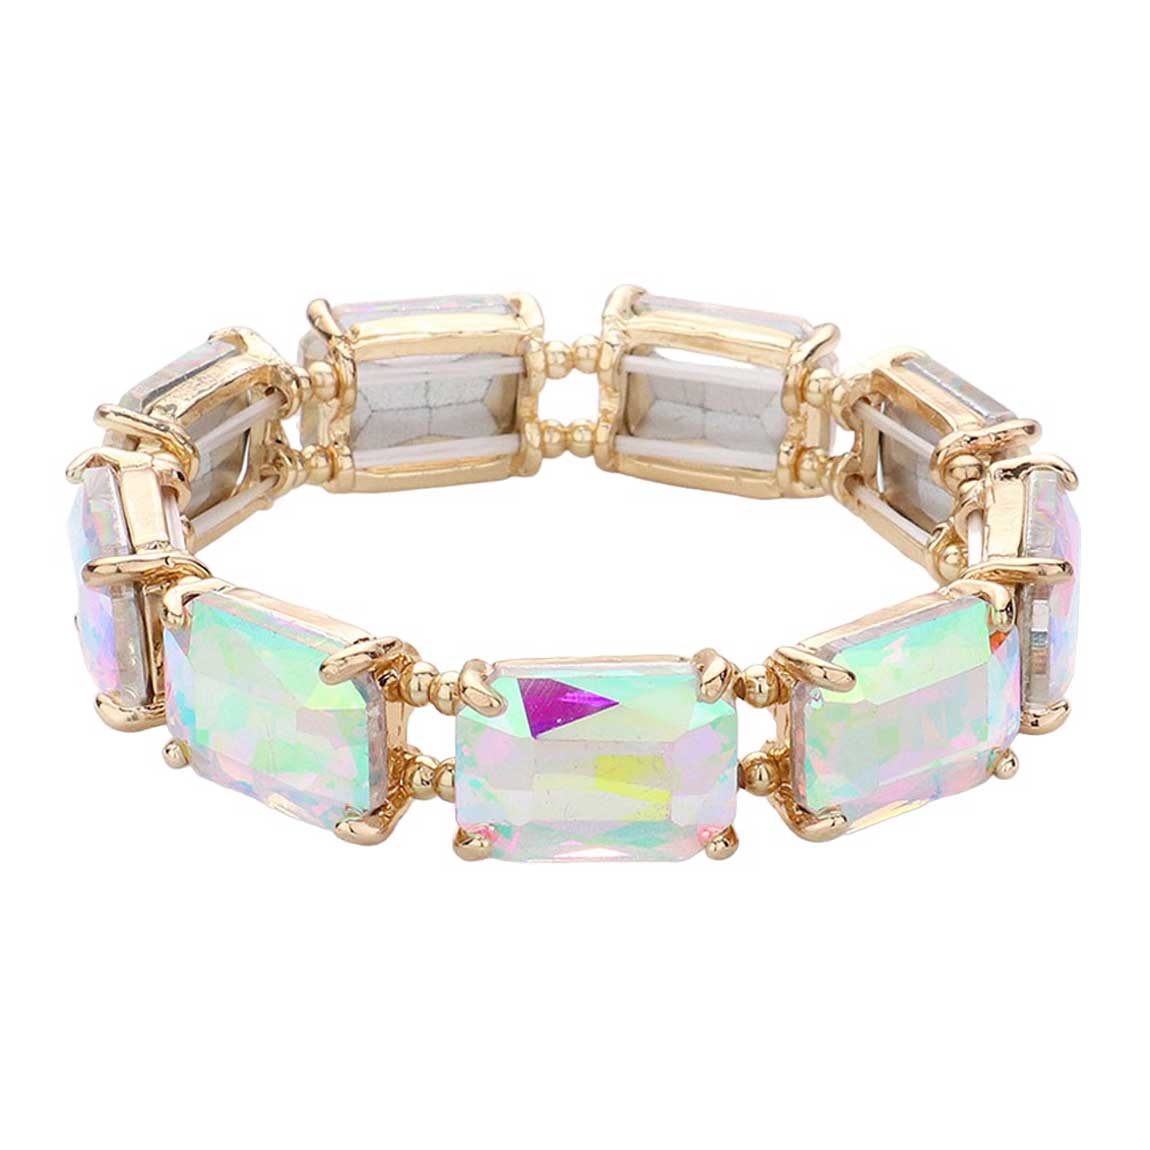 AB Gold Emerald Cut Stone Stretch Evening Bracelet, get ready with this Stretch Evening Bracelet to receive the best compliments on any special occasion. Put on a pop of color to complete your ensemble and make you stand out on special occasions. It looks so pretty, bright, and elegant on any special occasion. 